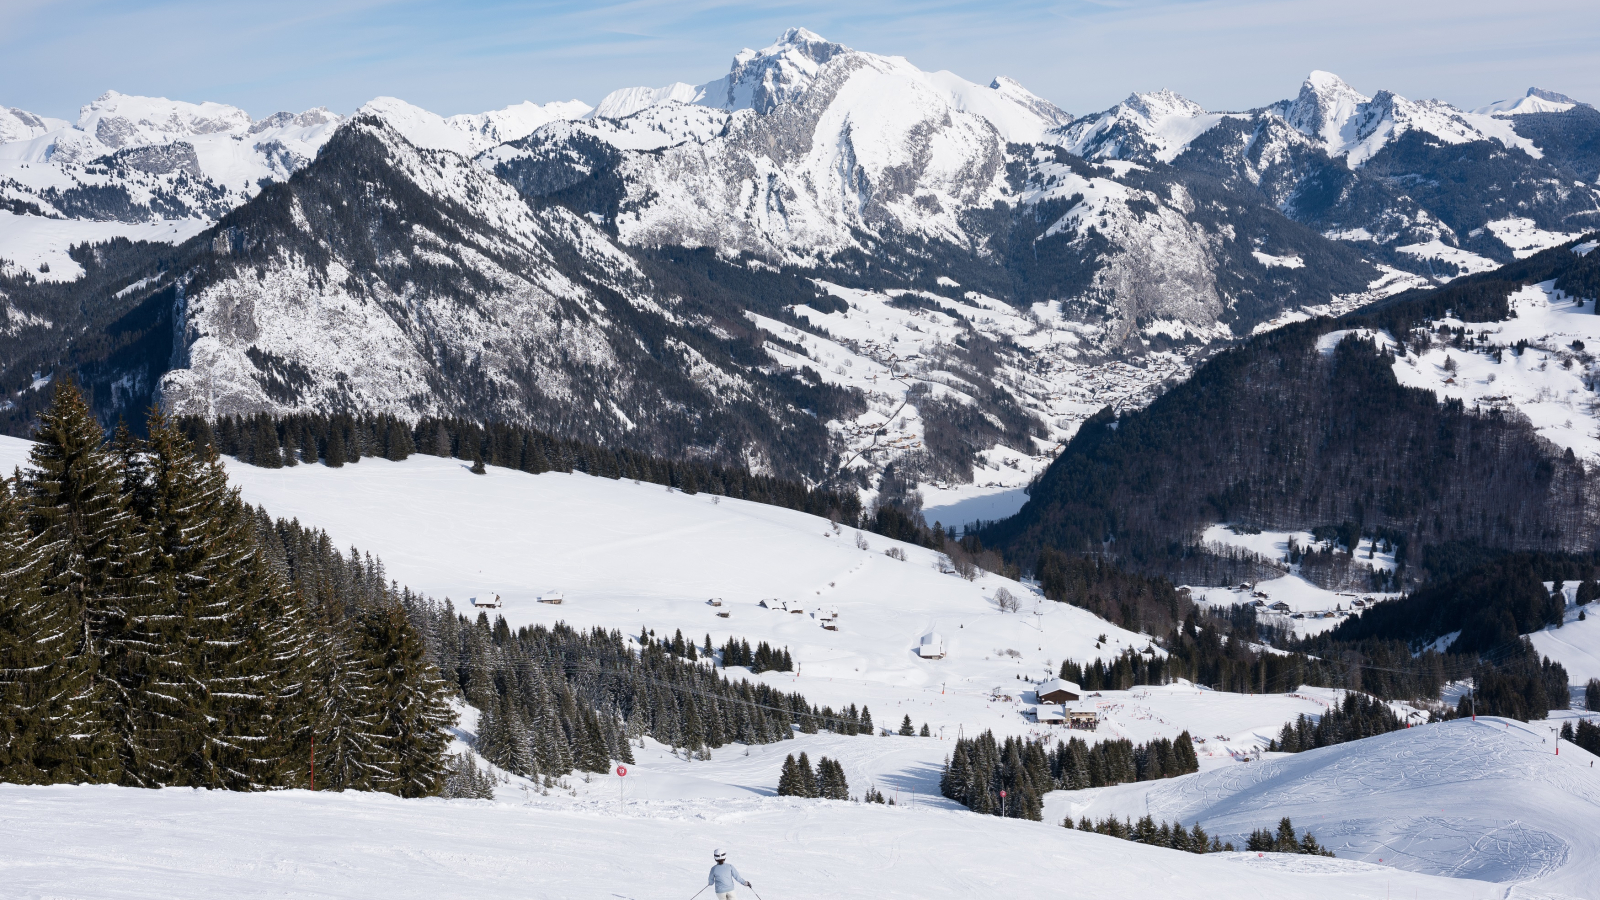 View of the Portes du Soleil mountains from Abondance